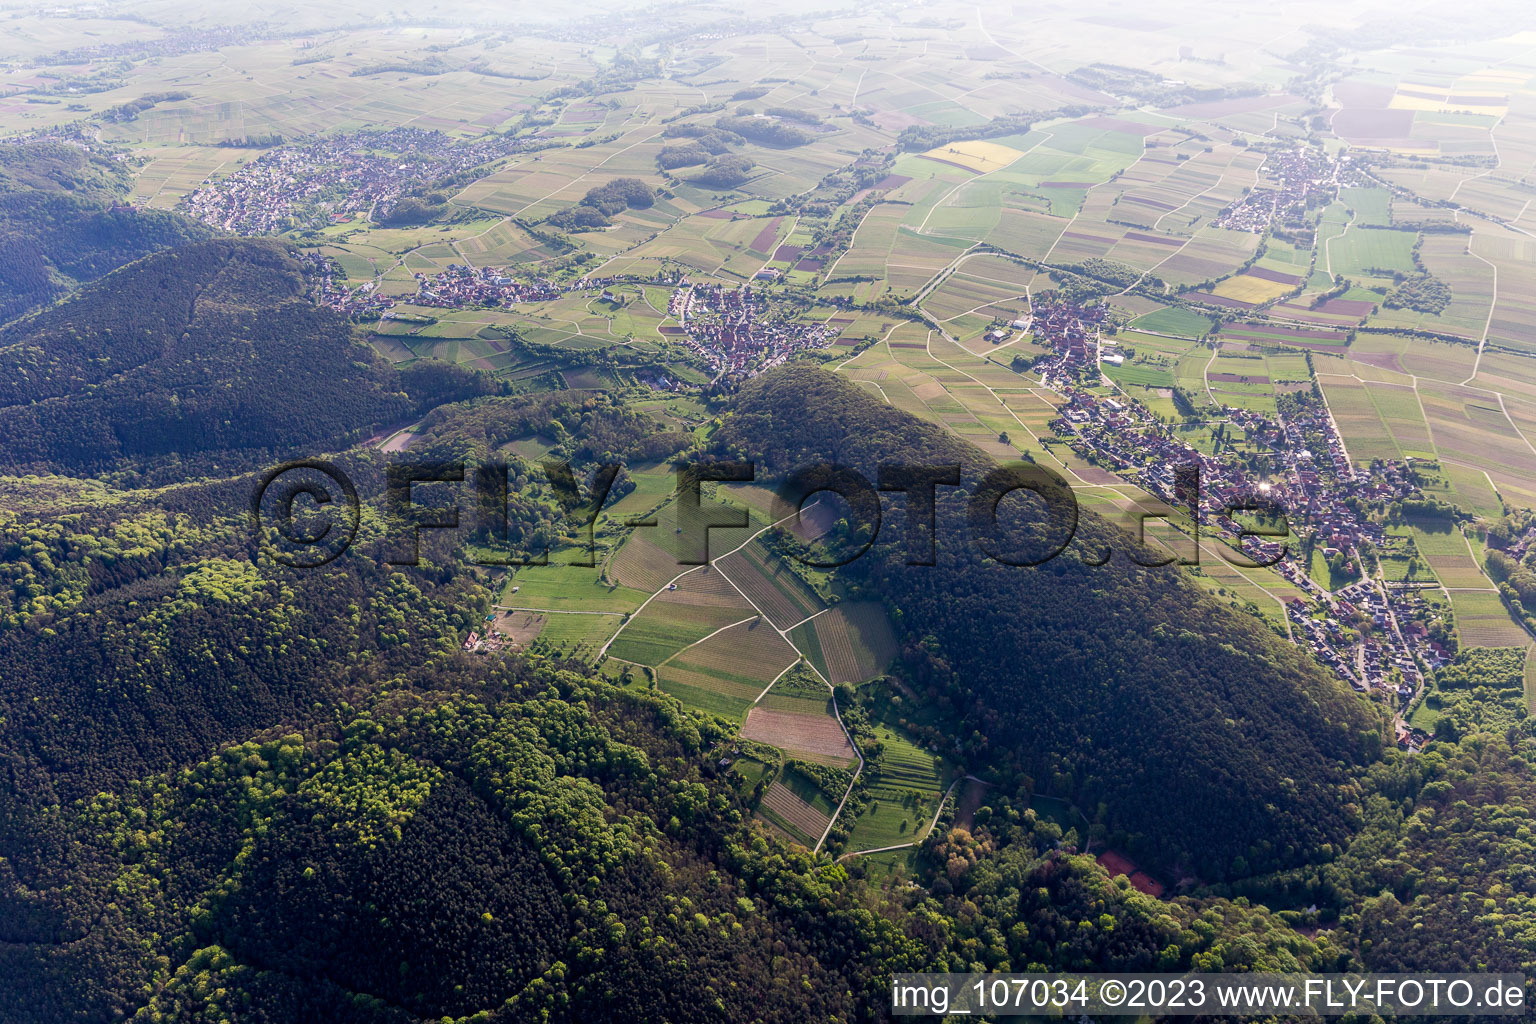 Pleisweiler-Oberhofen in the state Rhineland-Palatinate, Germany from above